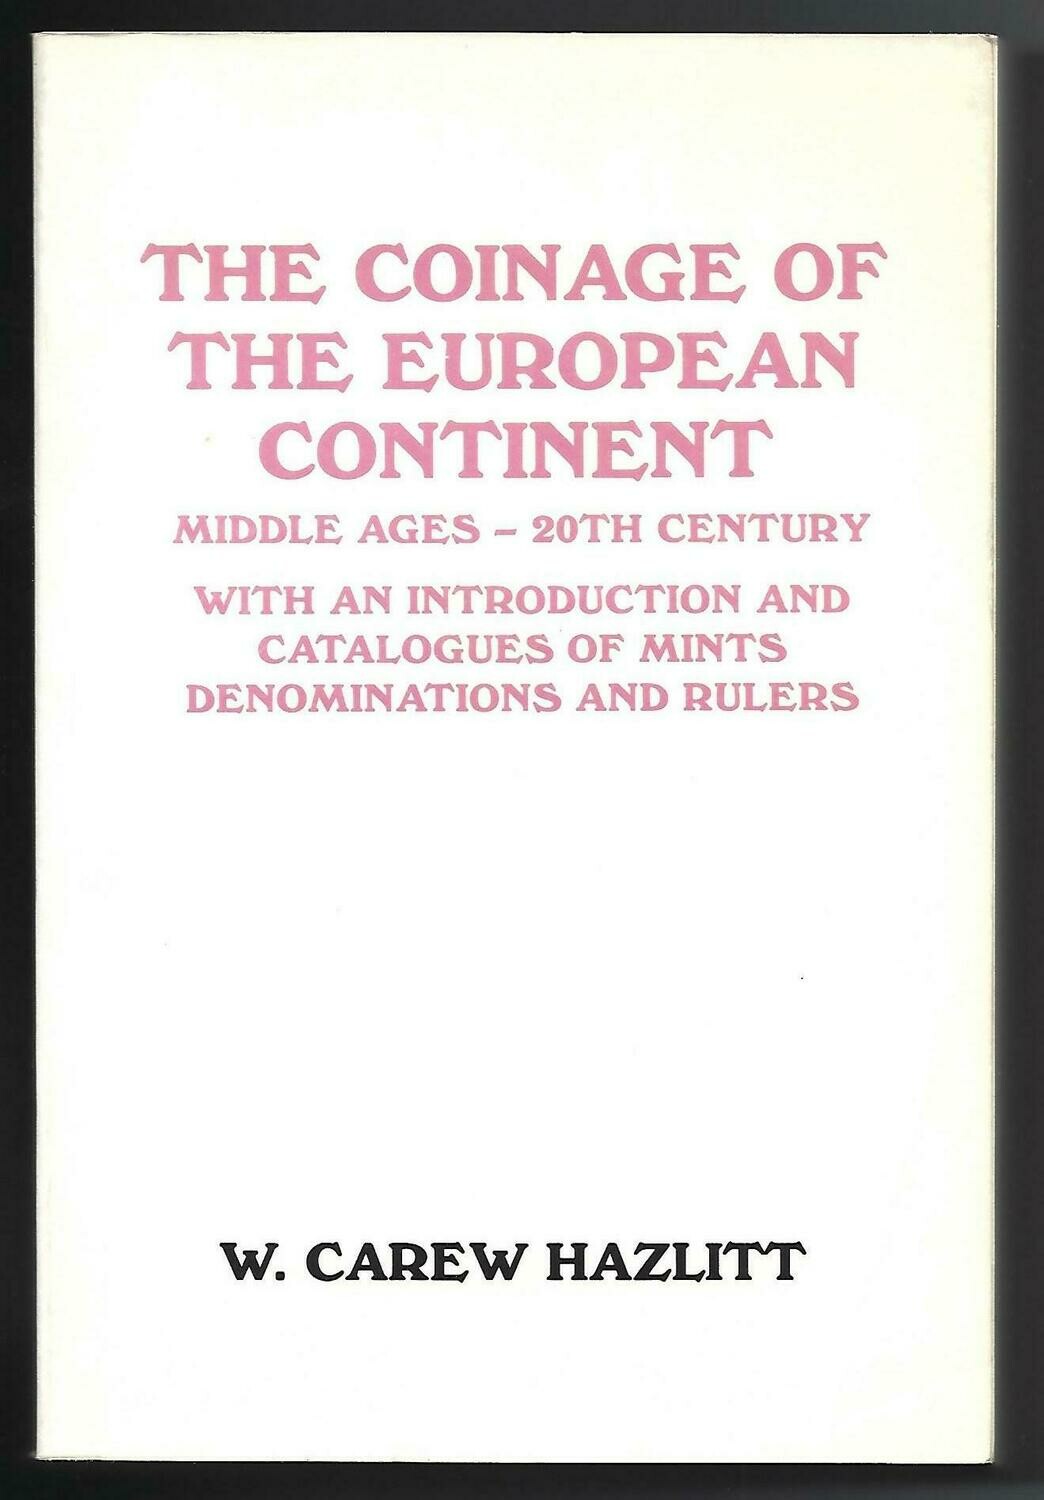 World; W. Carew Hazlitt, "The Coinage of the European Continent; Middle Ages - 20th Century", plus bound in supplement.